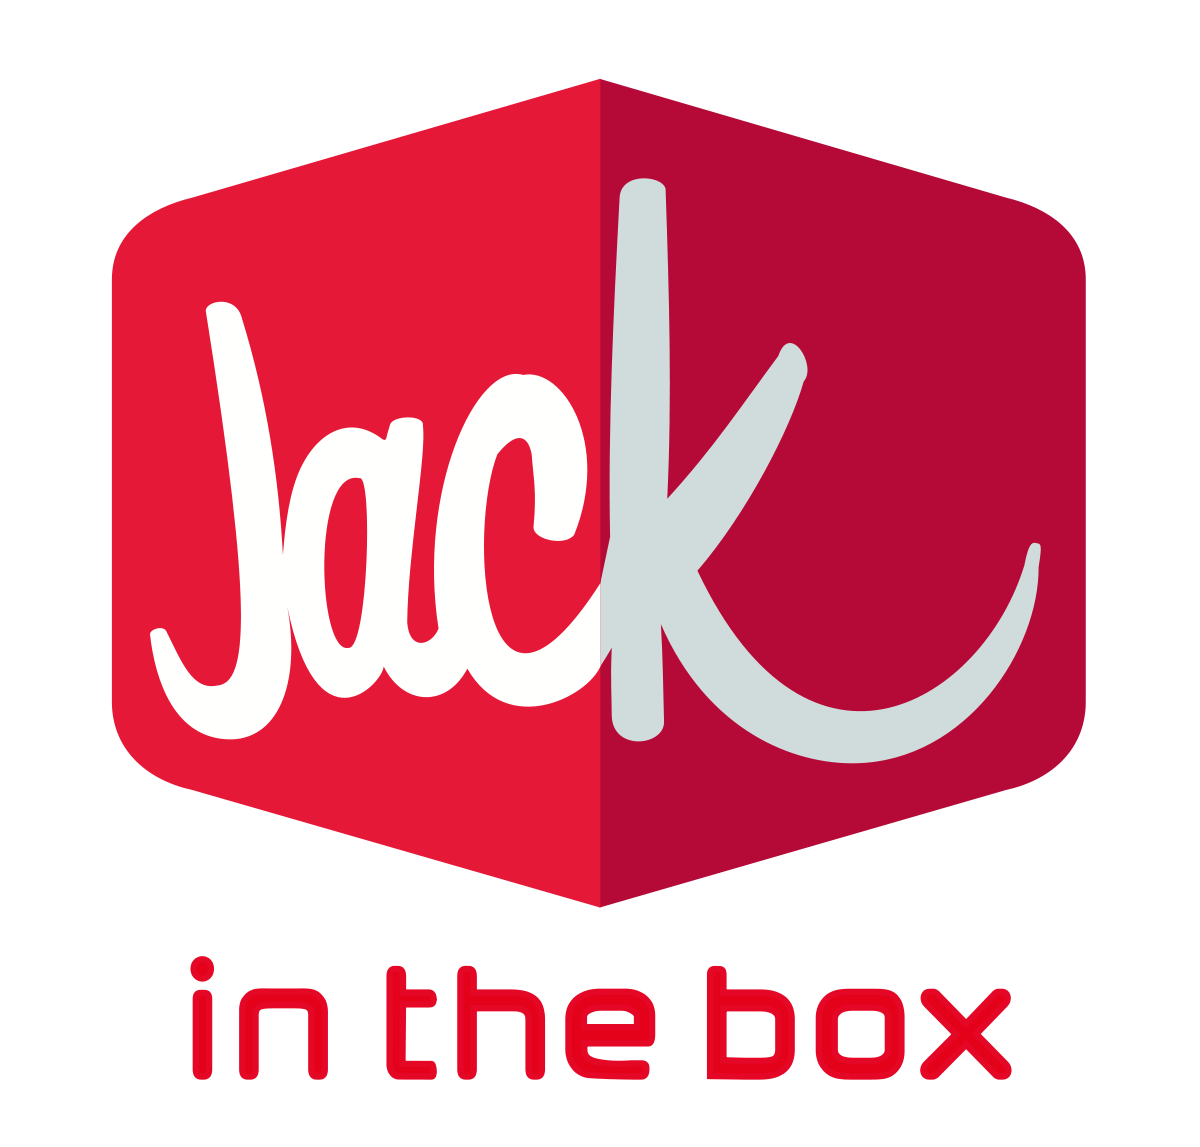 American Fast Food Logo - Jack in the Box